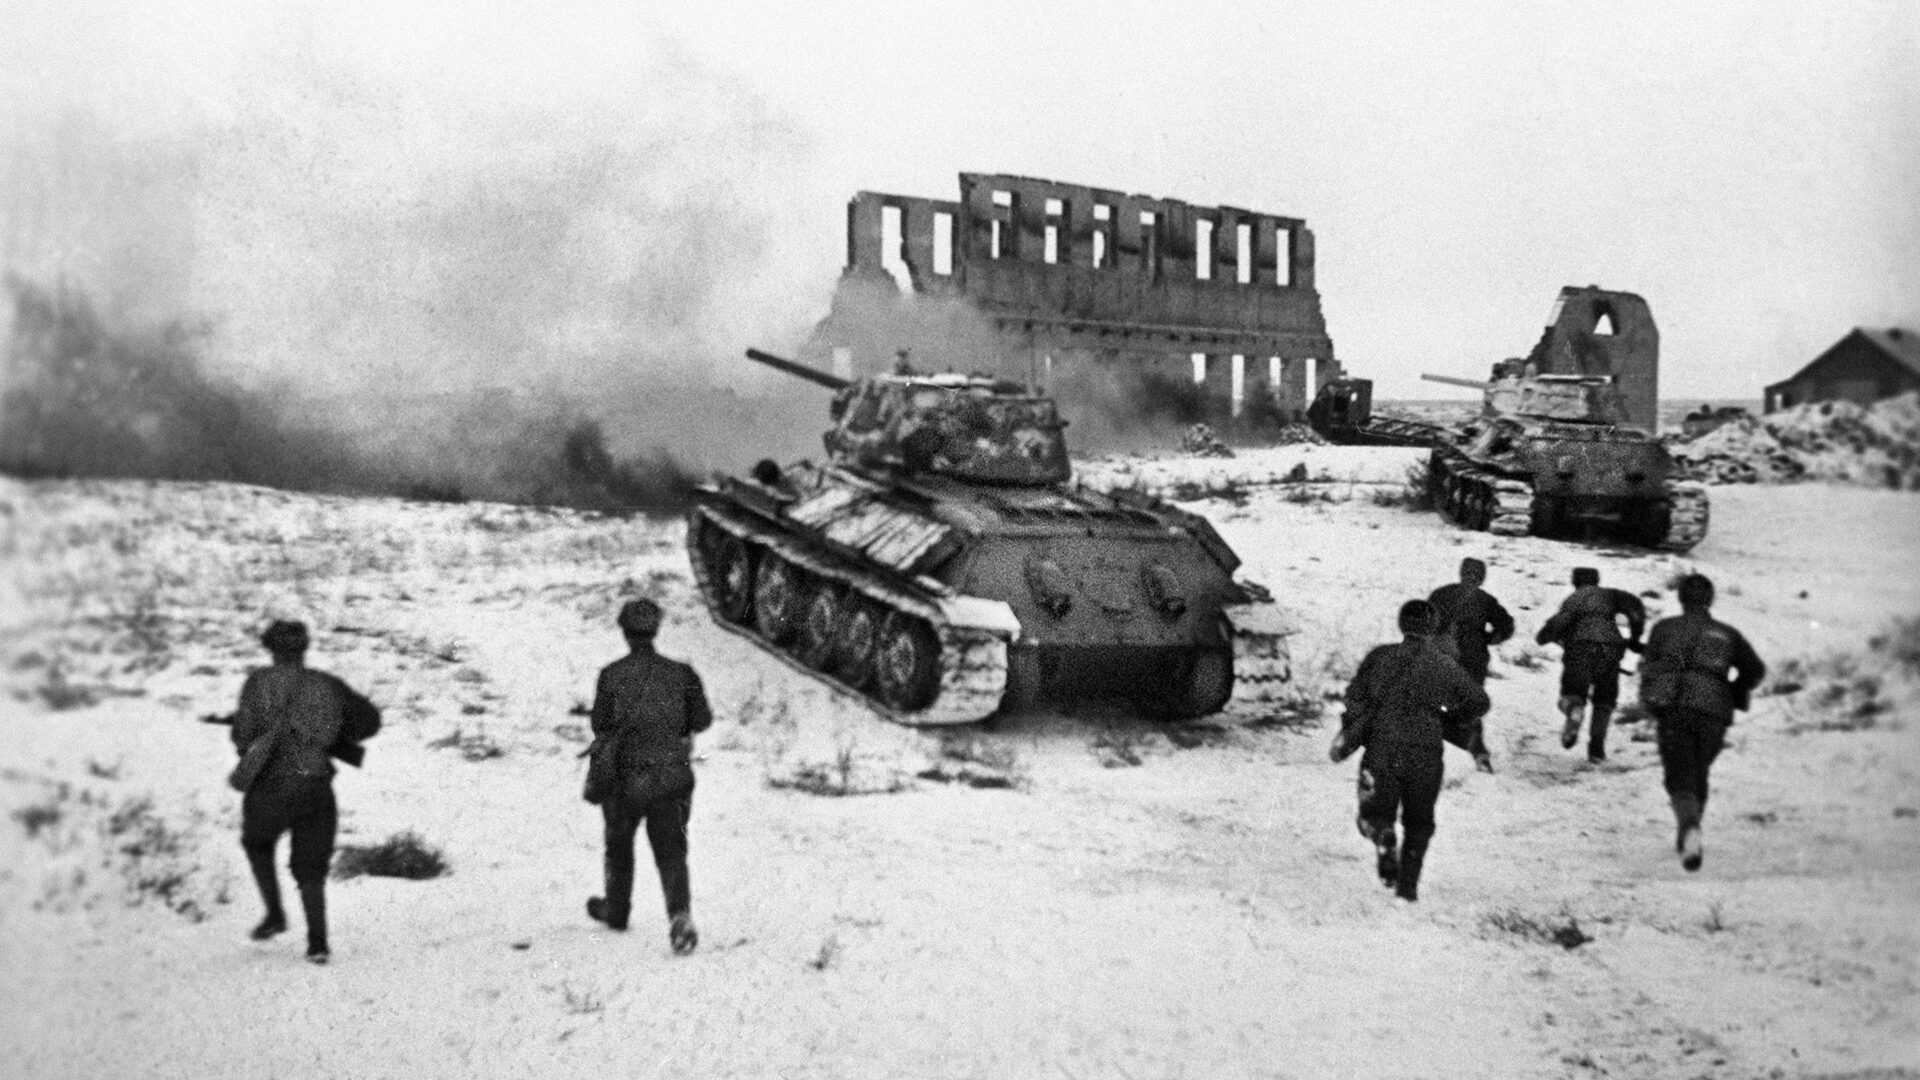 Russian soldiers advance across a snow-covered and war-torn landscape as they support T-34 medium tanks during winter operations against the invading Germans. The T-34, perhaps the best all-around tank of World War II, helped turn the tide on the Eastern Front.